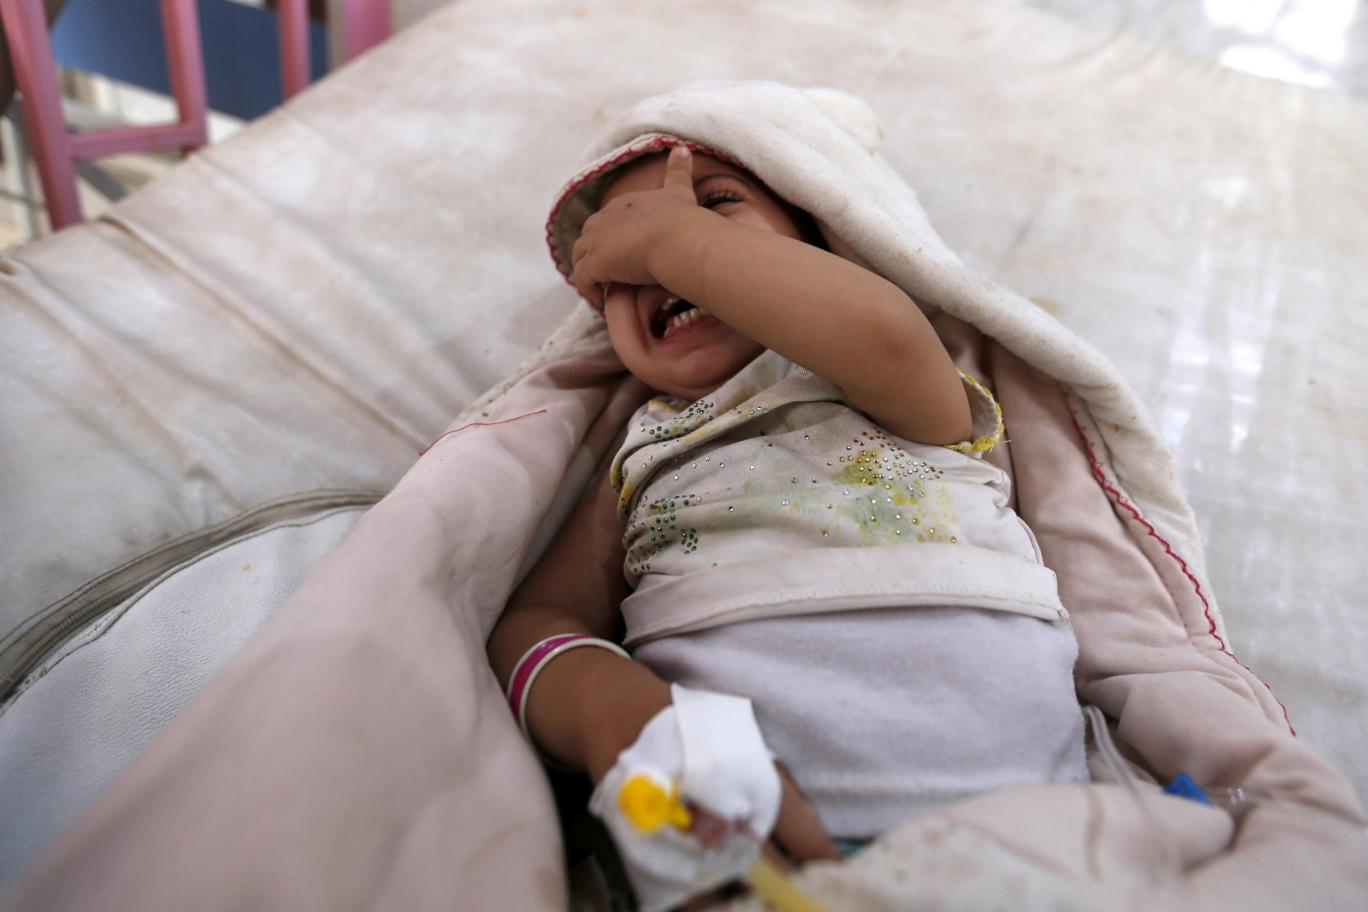 The conflict in Yemen has led to widespread famine and a cholera epidemic, with half of those affected by the disease believed to be children